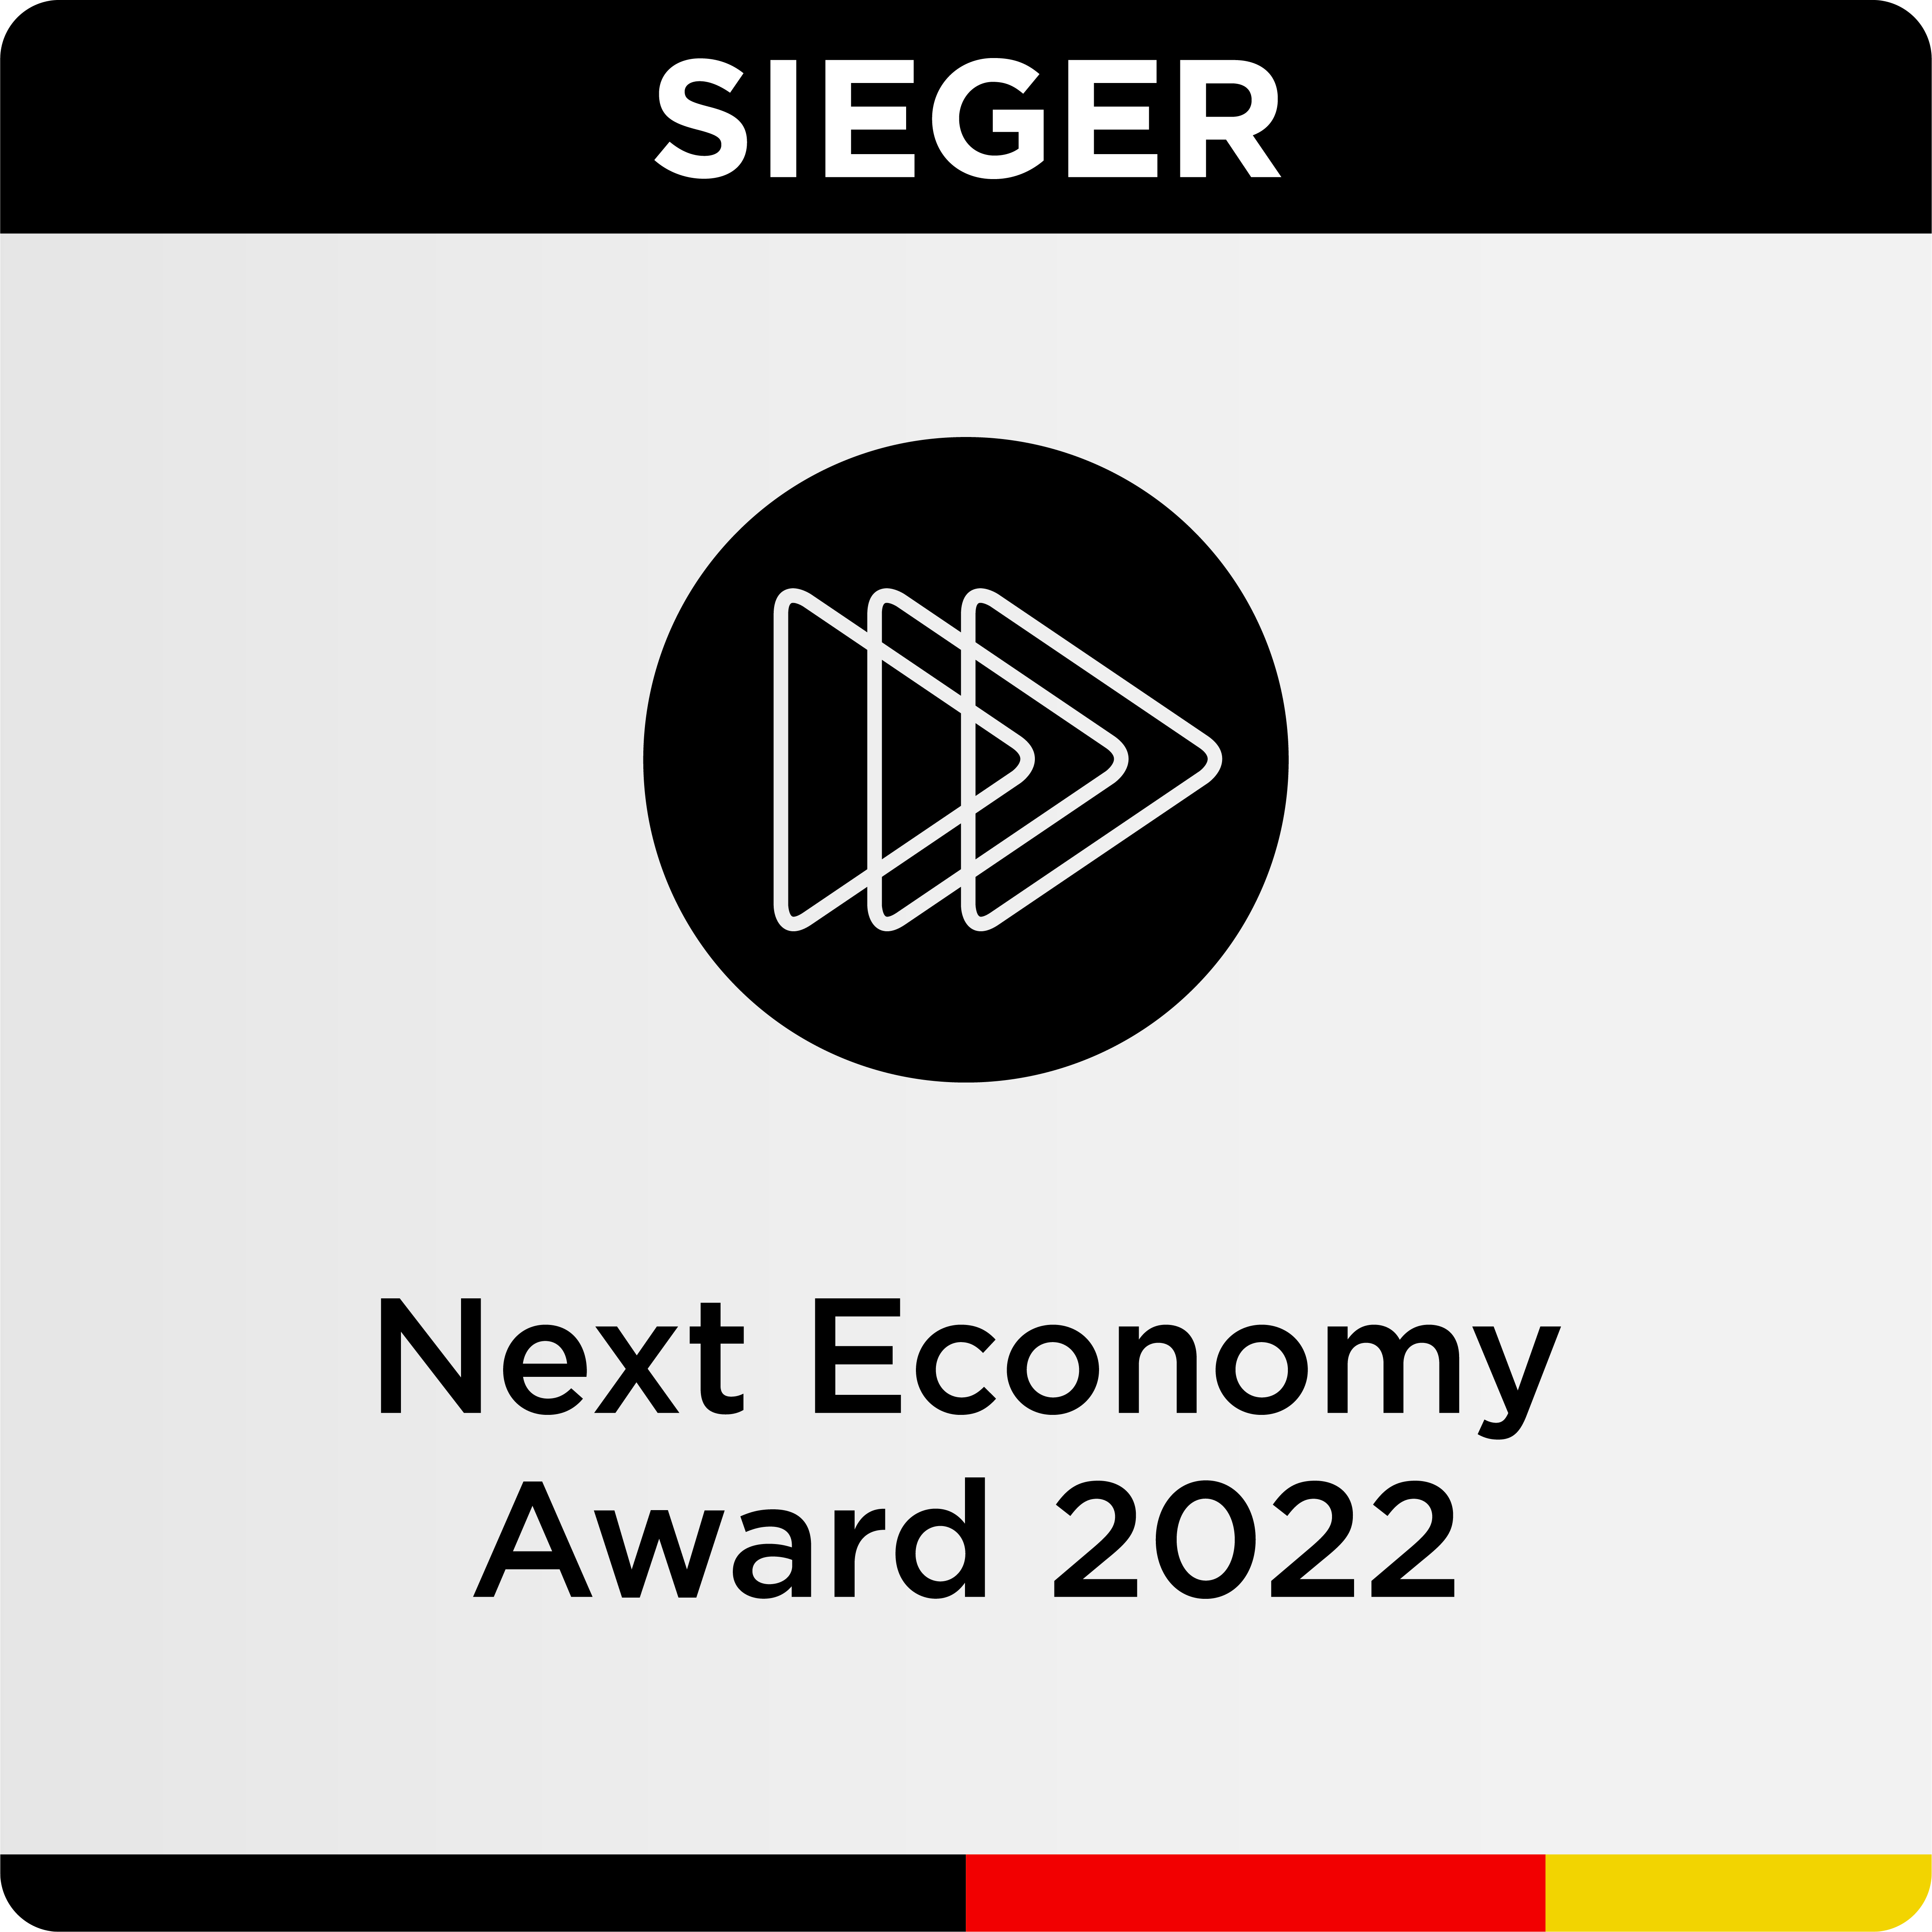 And the Next Economy Award goes to…